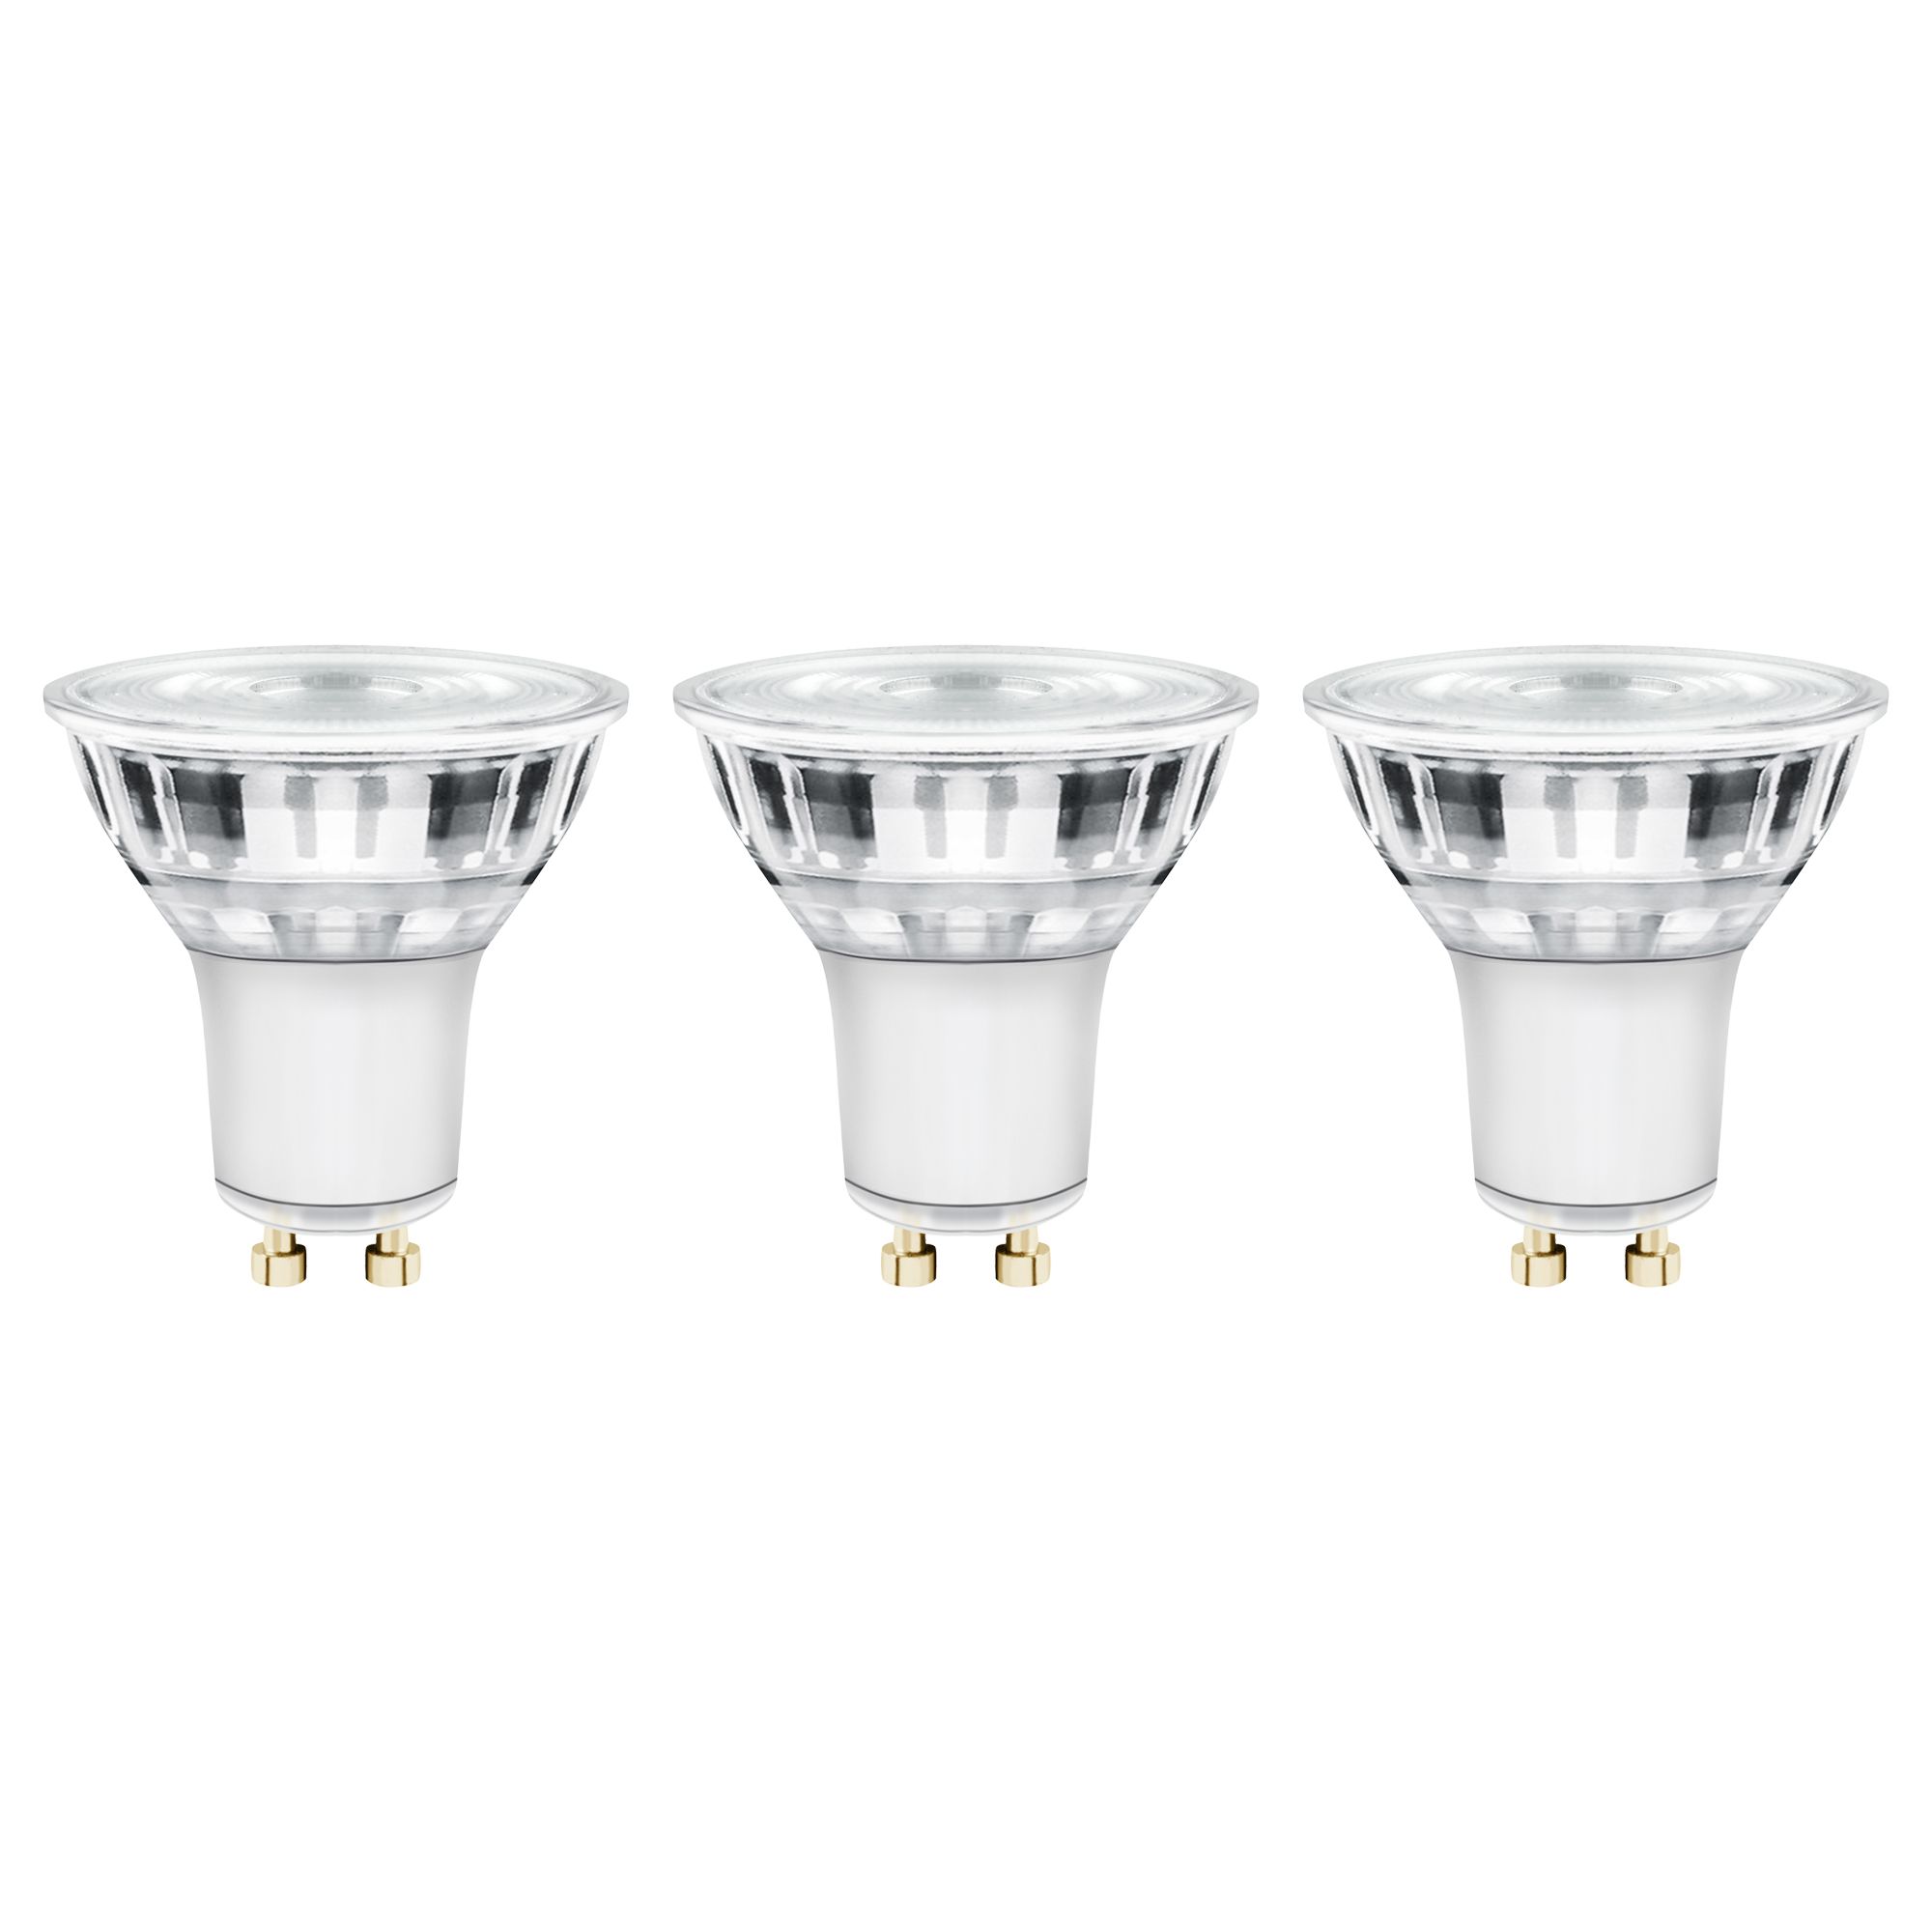 Diall GU10 at Warm of white | B&Q 4.5W Light 3 Reflector Pack 345lm bulb, DIY LED Dimmable